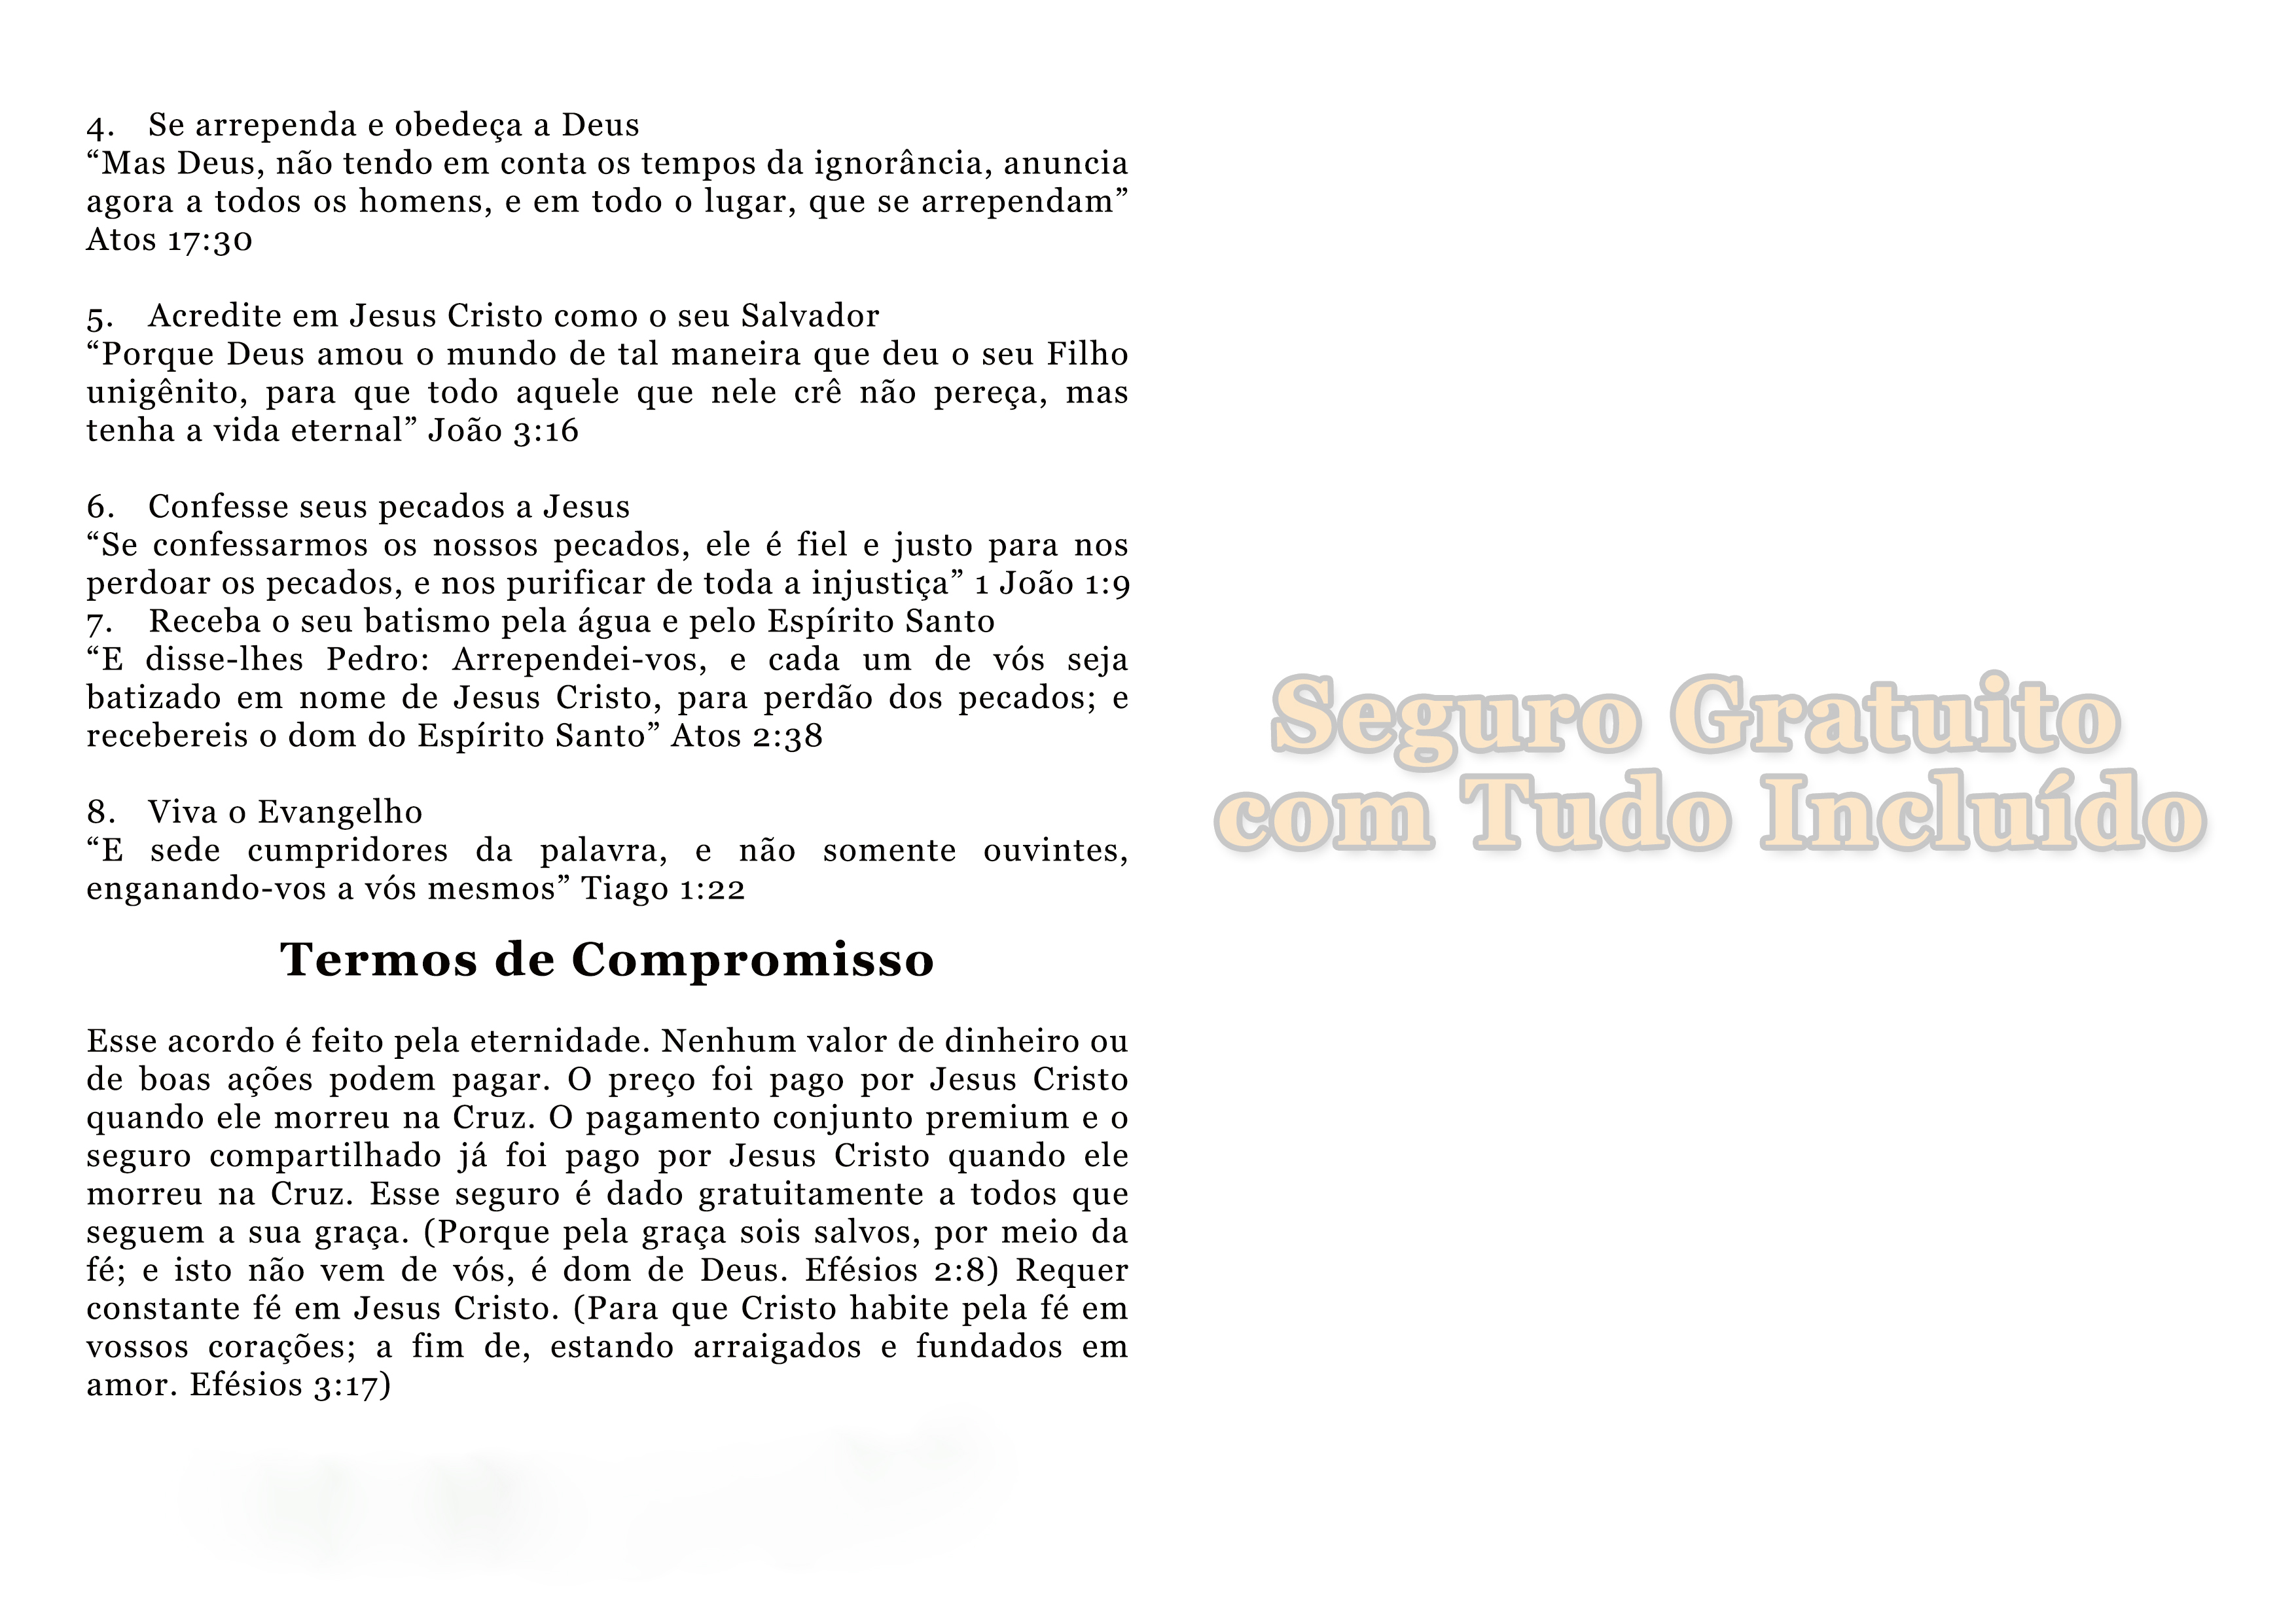 Insurance_policy-portugues-page22